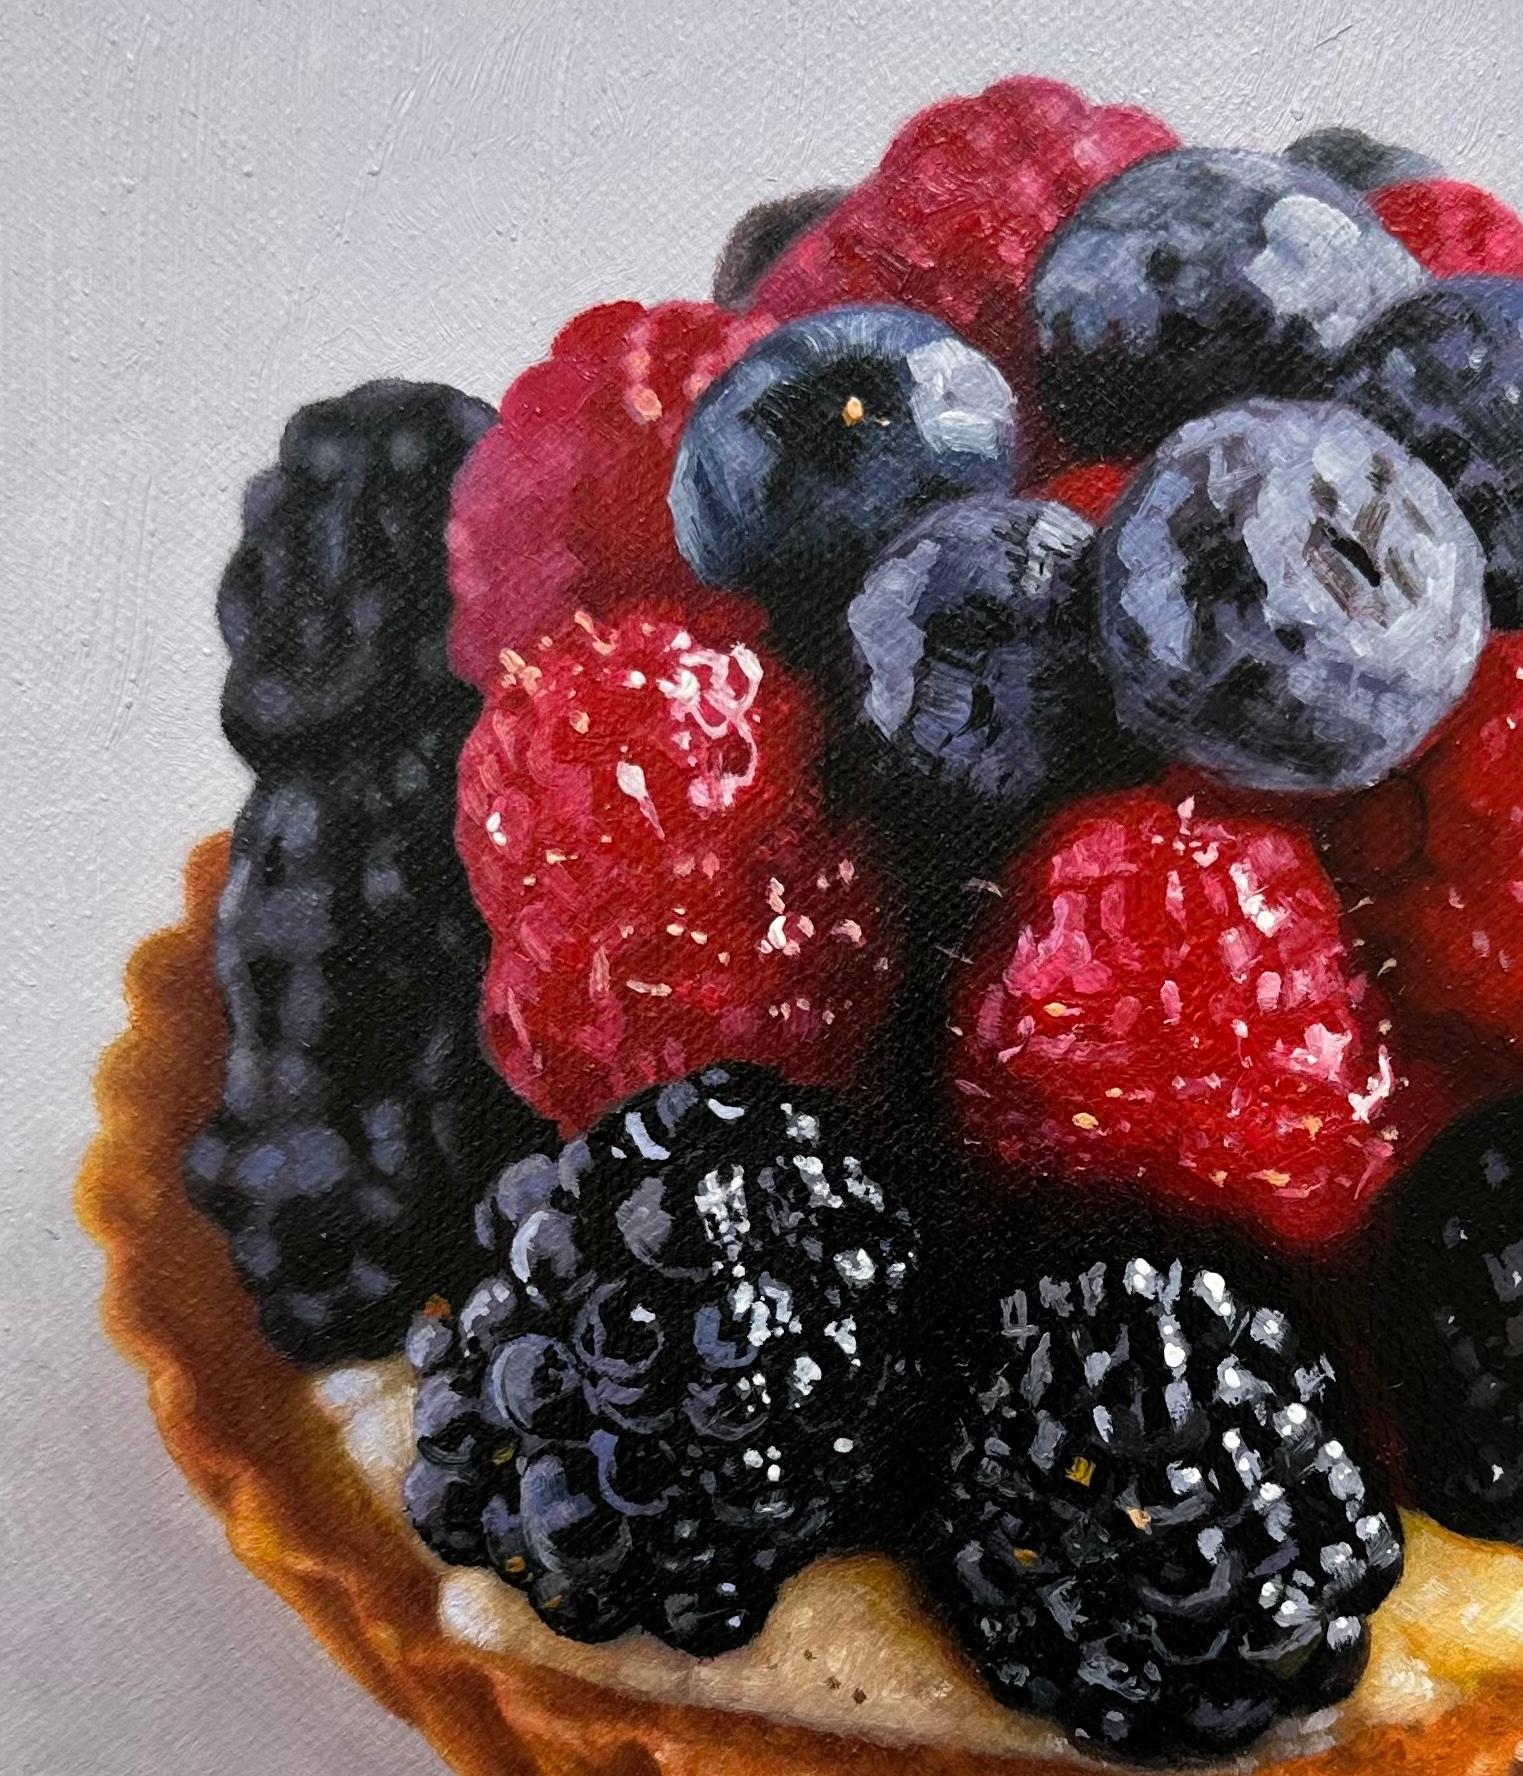 Blackberry, Raspberry, and Blueberry Tart with Hair - Photorealist Painting by Marc Dennis